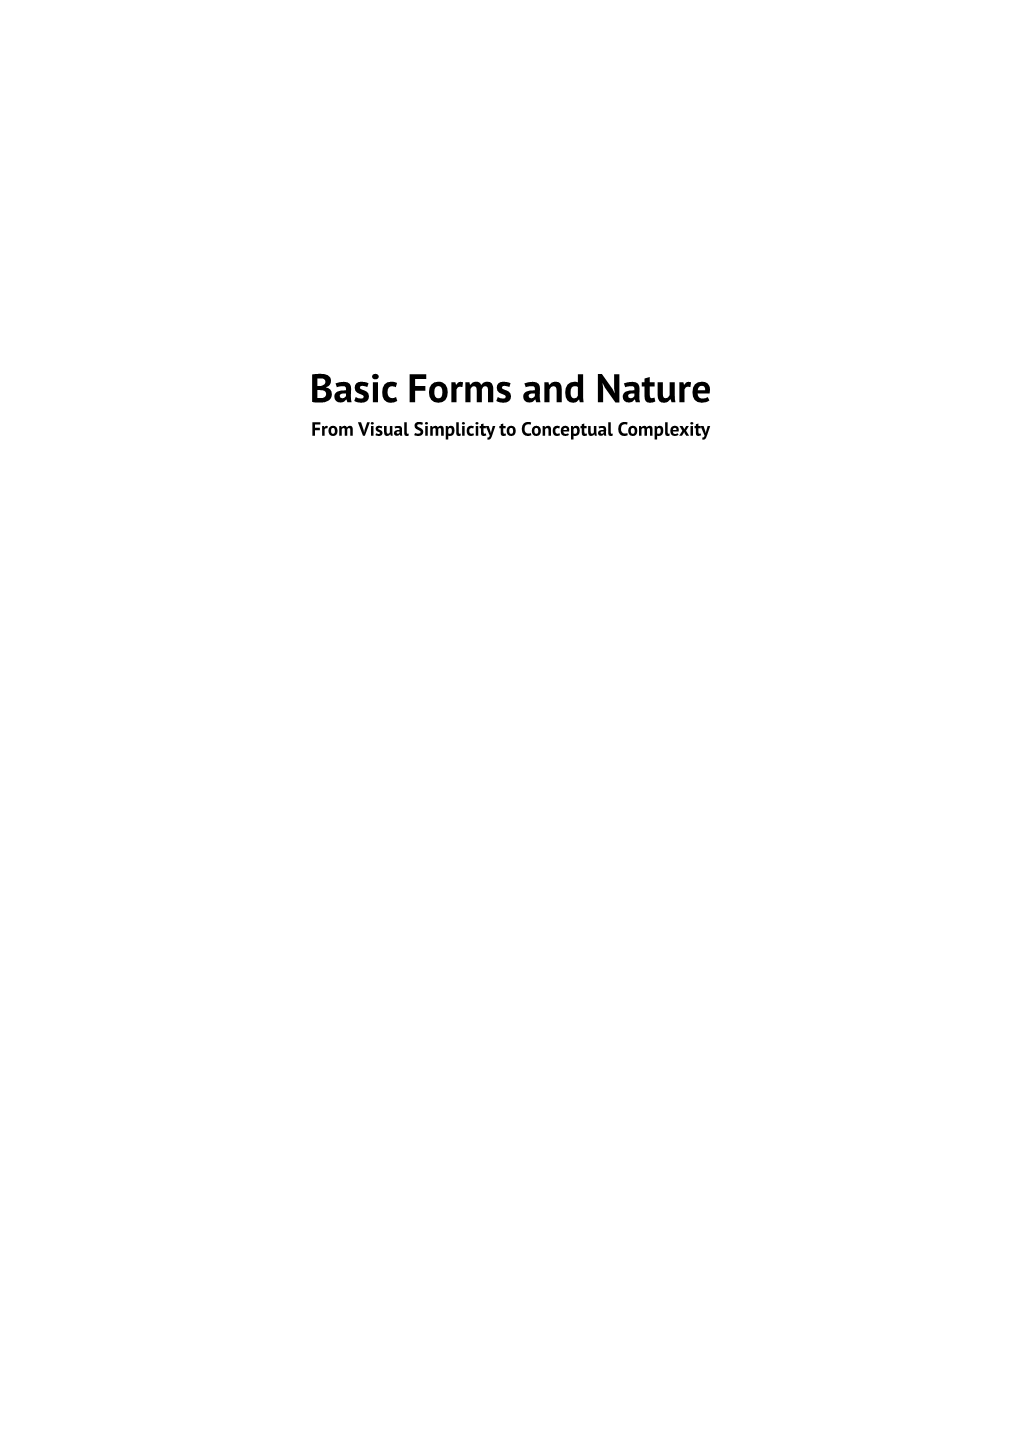 Basic Forms and Nature from Visual Simplicity to Conceptual Complexity